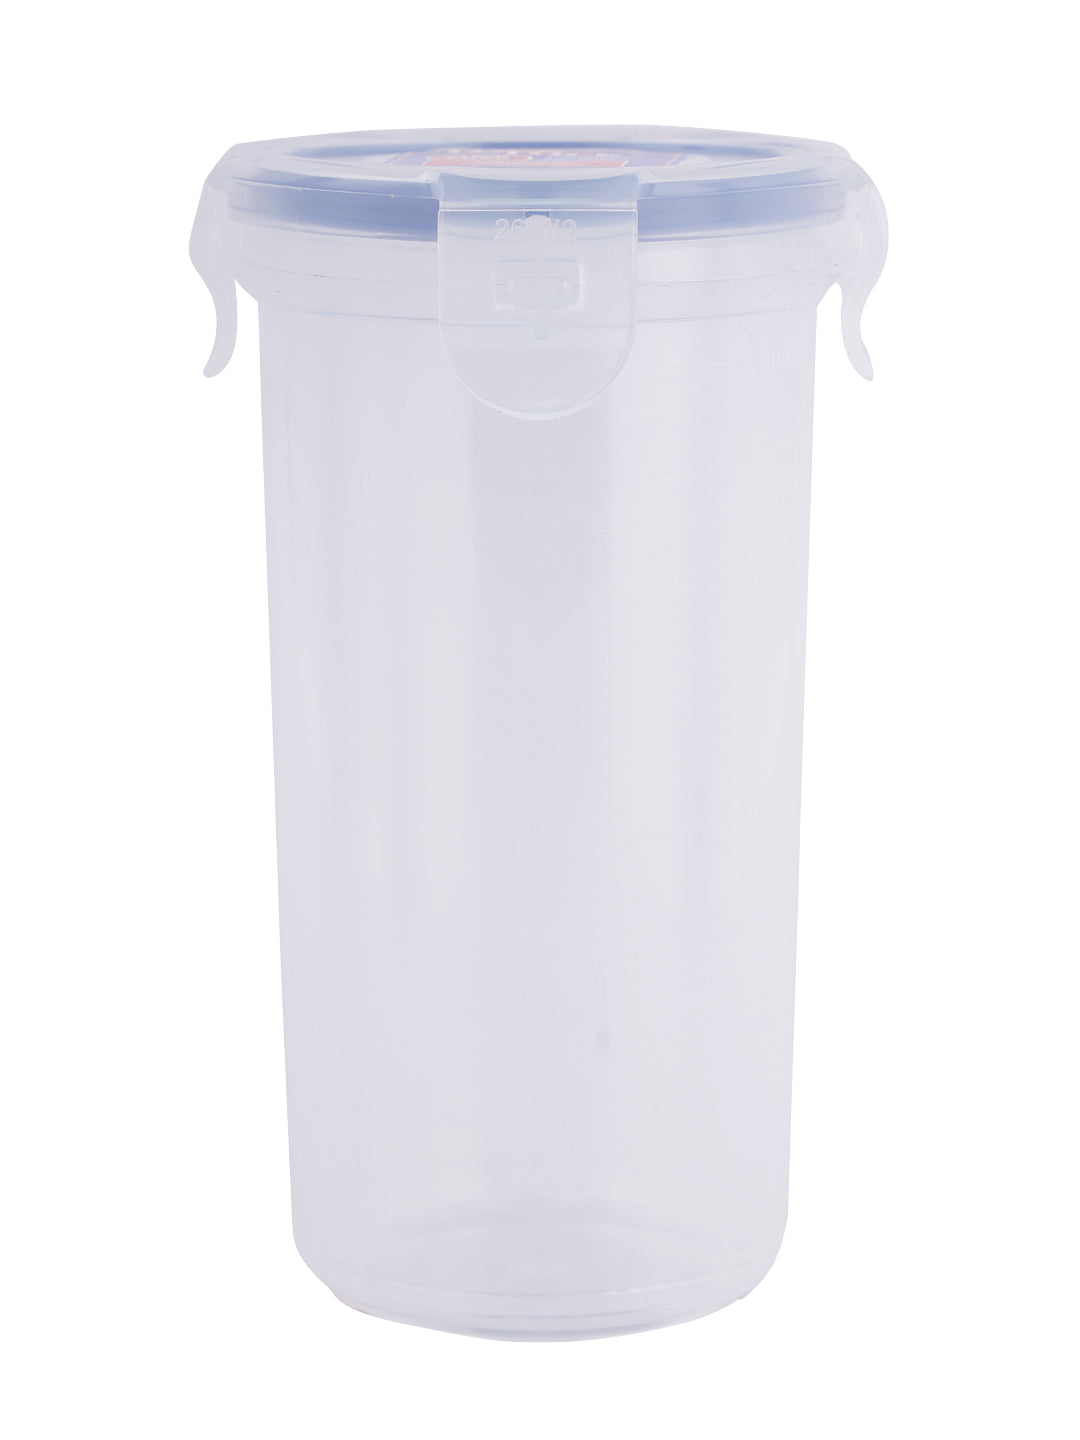 LocknLock Classics Small Round Food Container with Leak Proof Locking Lid, Clear